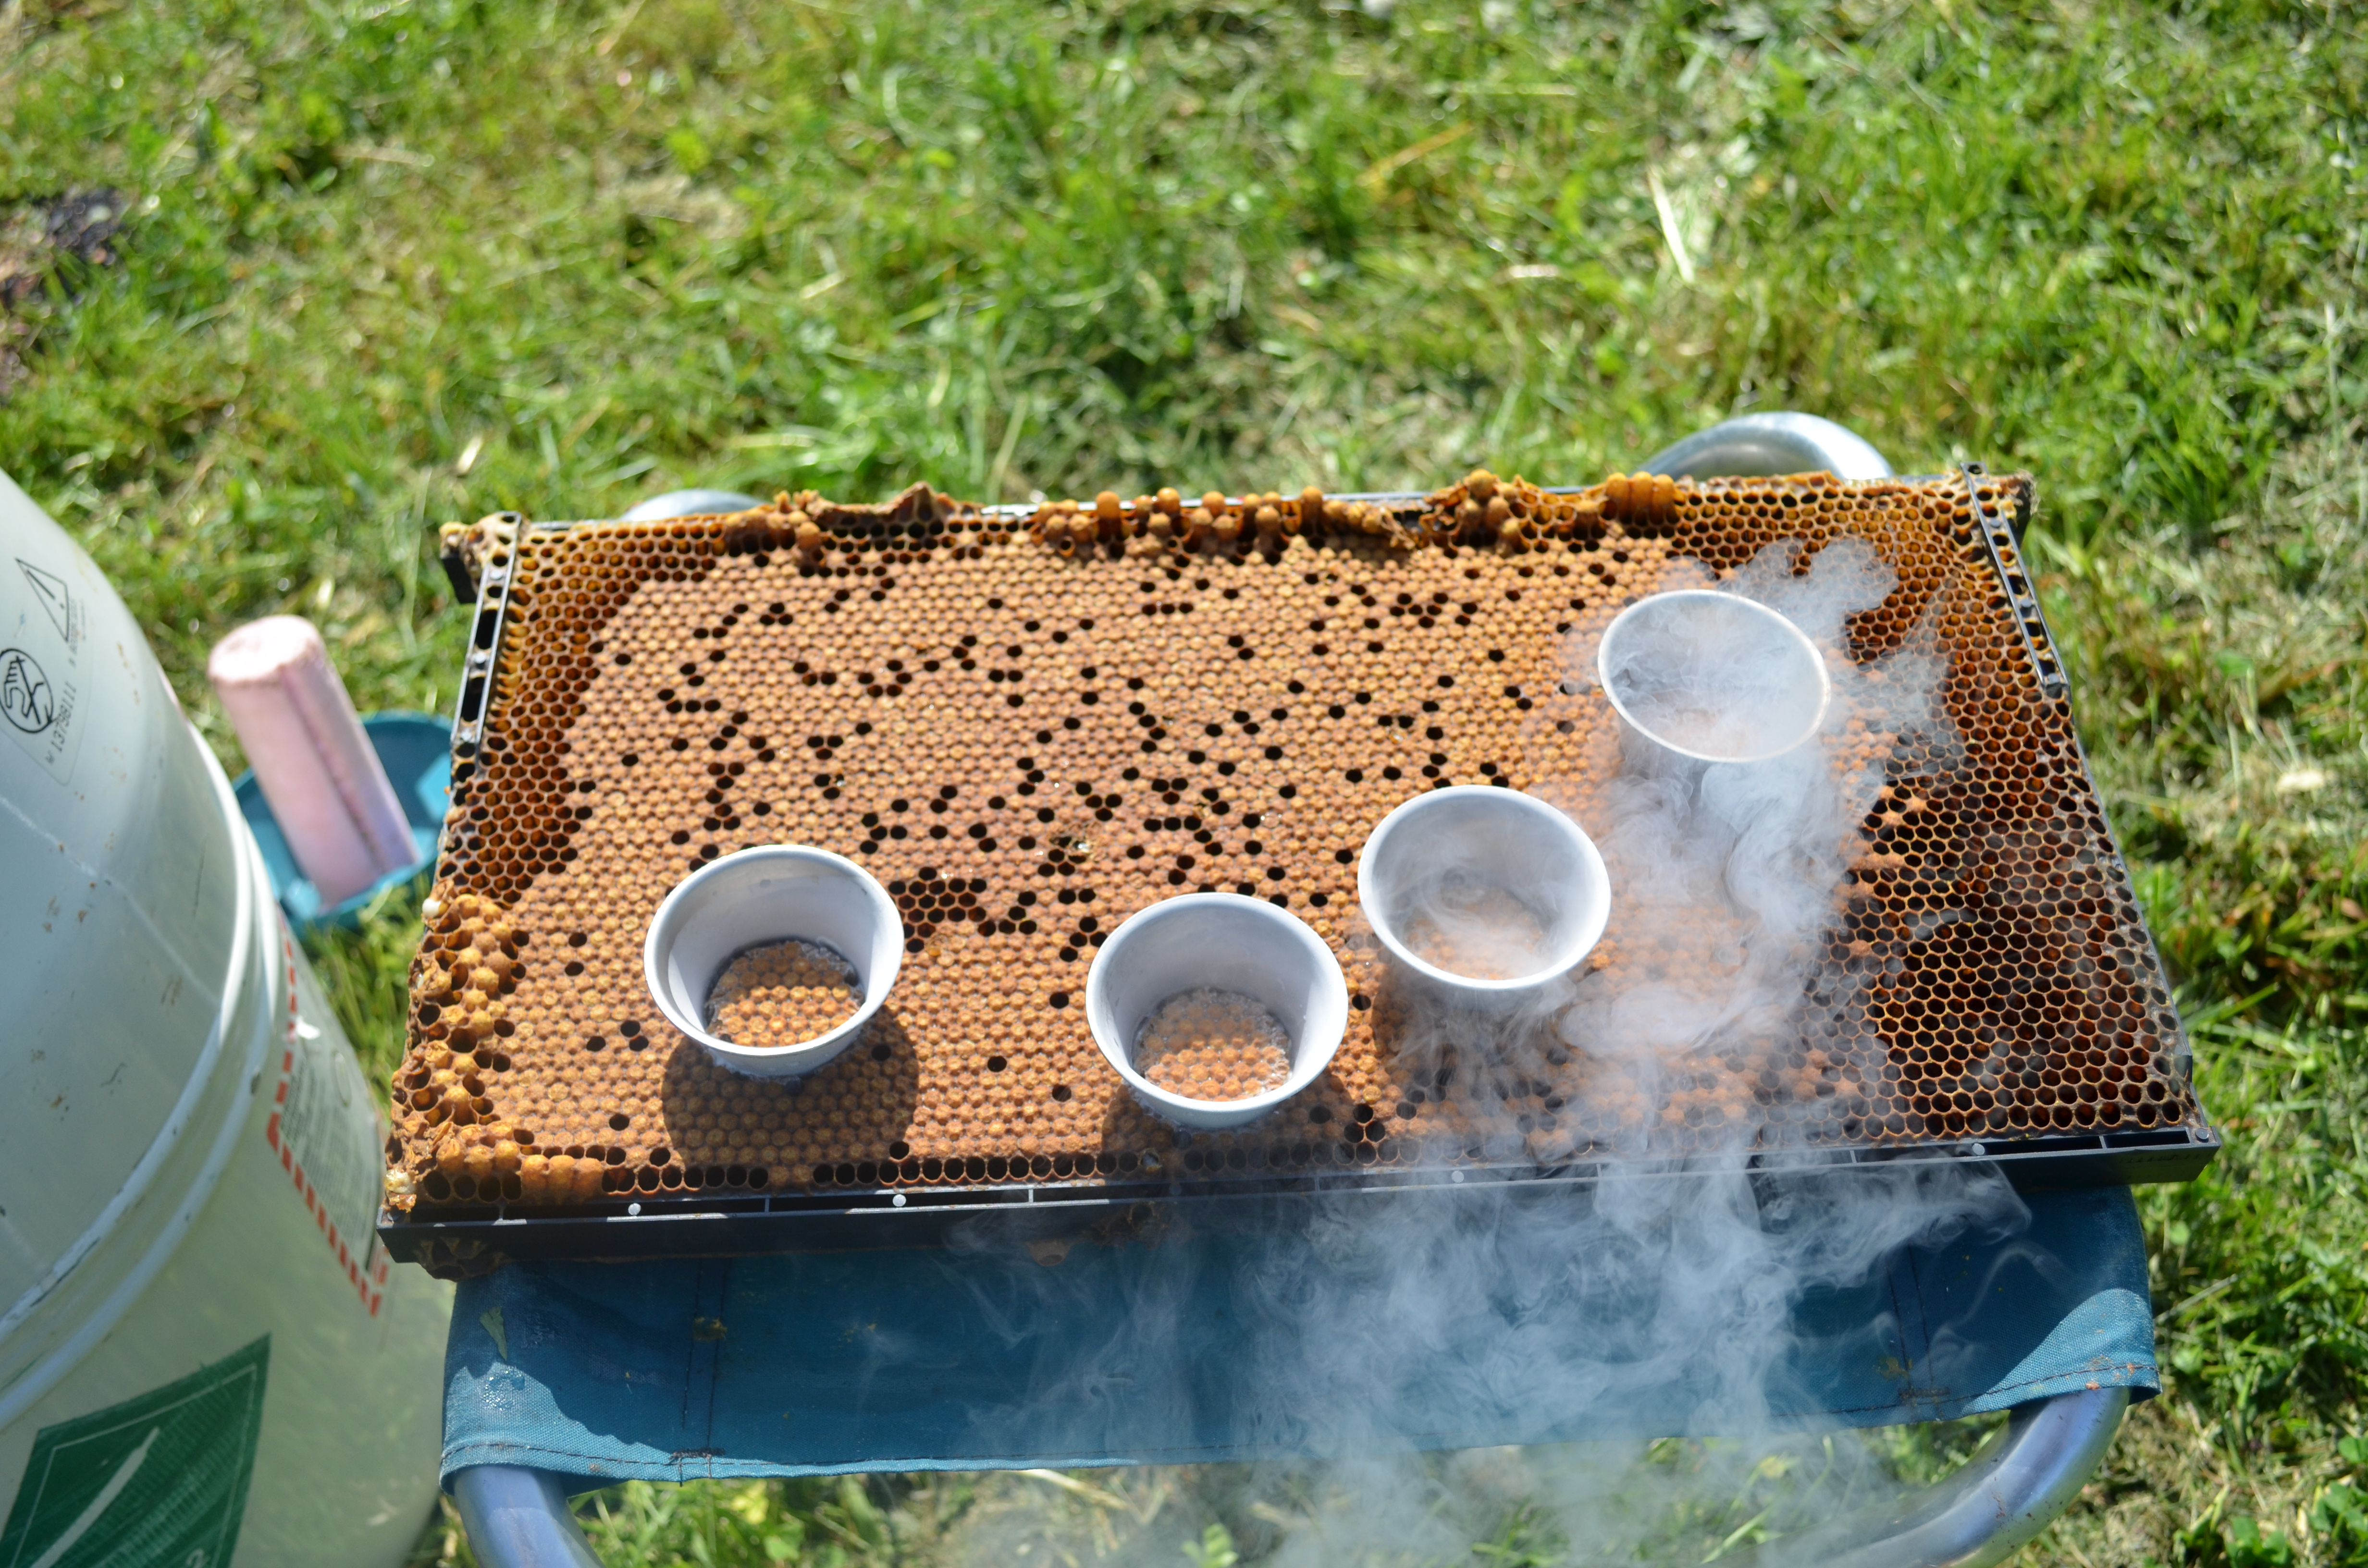 Liquid nitrogen being poured on 4 sections of brood